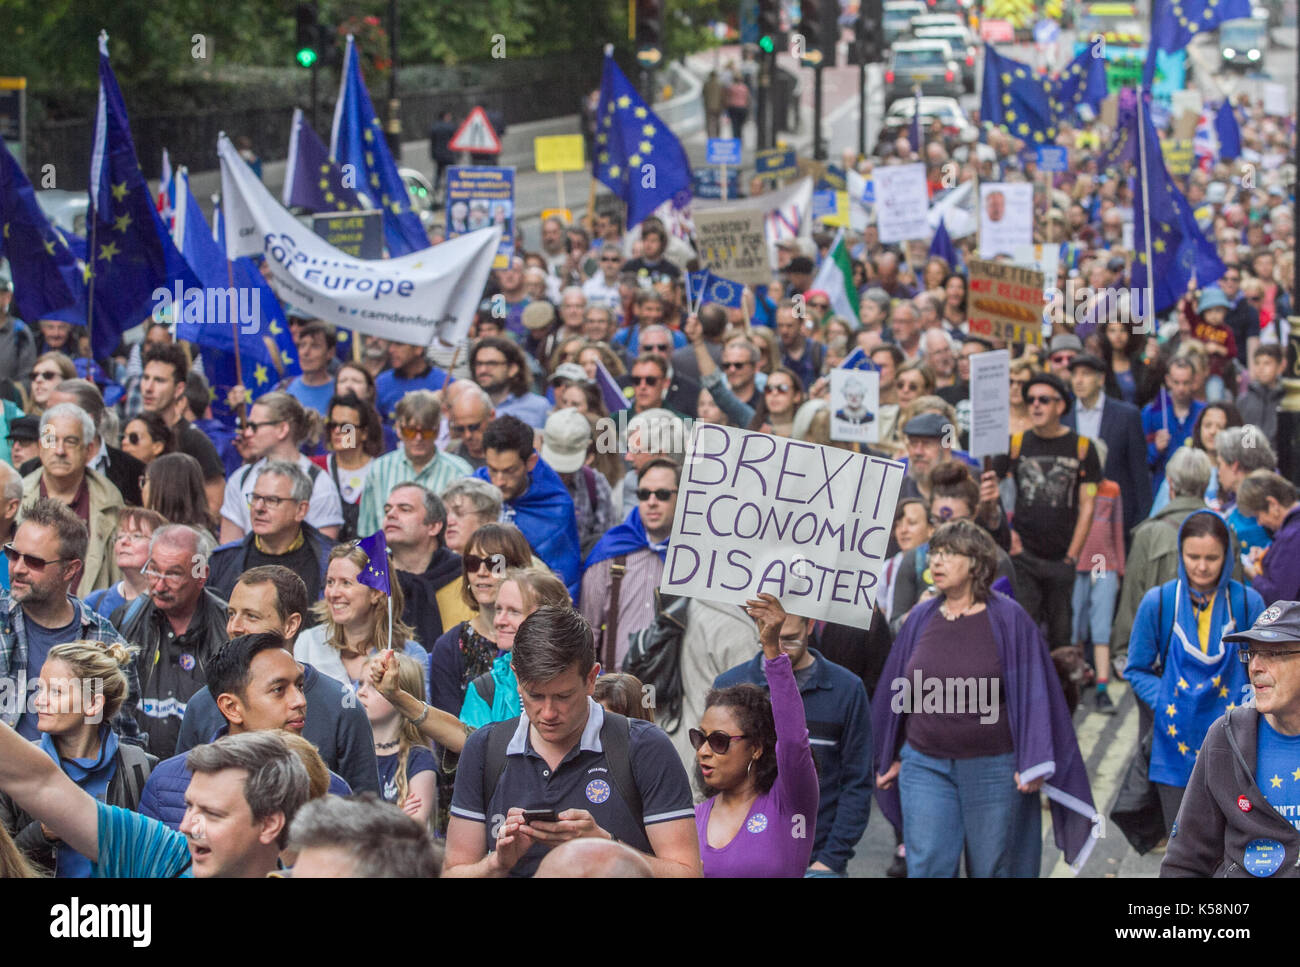 London, UK. 9th Sep, 2017. Thousands of anti-Brexit activists marched with European flags and banners to Parliament campaigning for the British Government to rethink and reject Brexit and about the dangers of the plans to leave the European Union. Credit: amer ghazzal/Alamy Live News Stock Photo